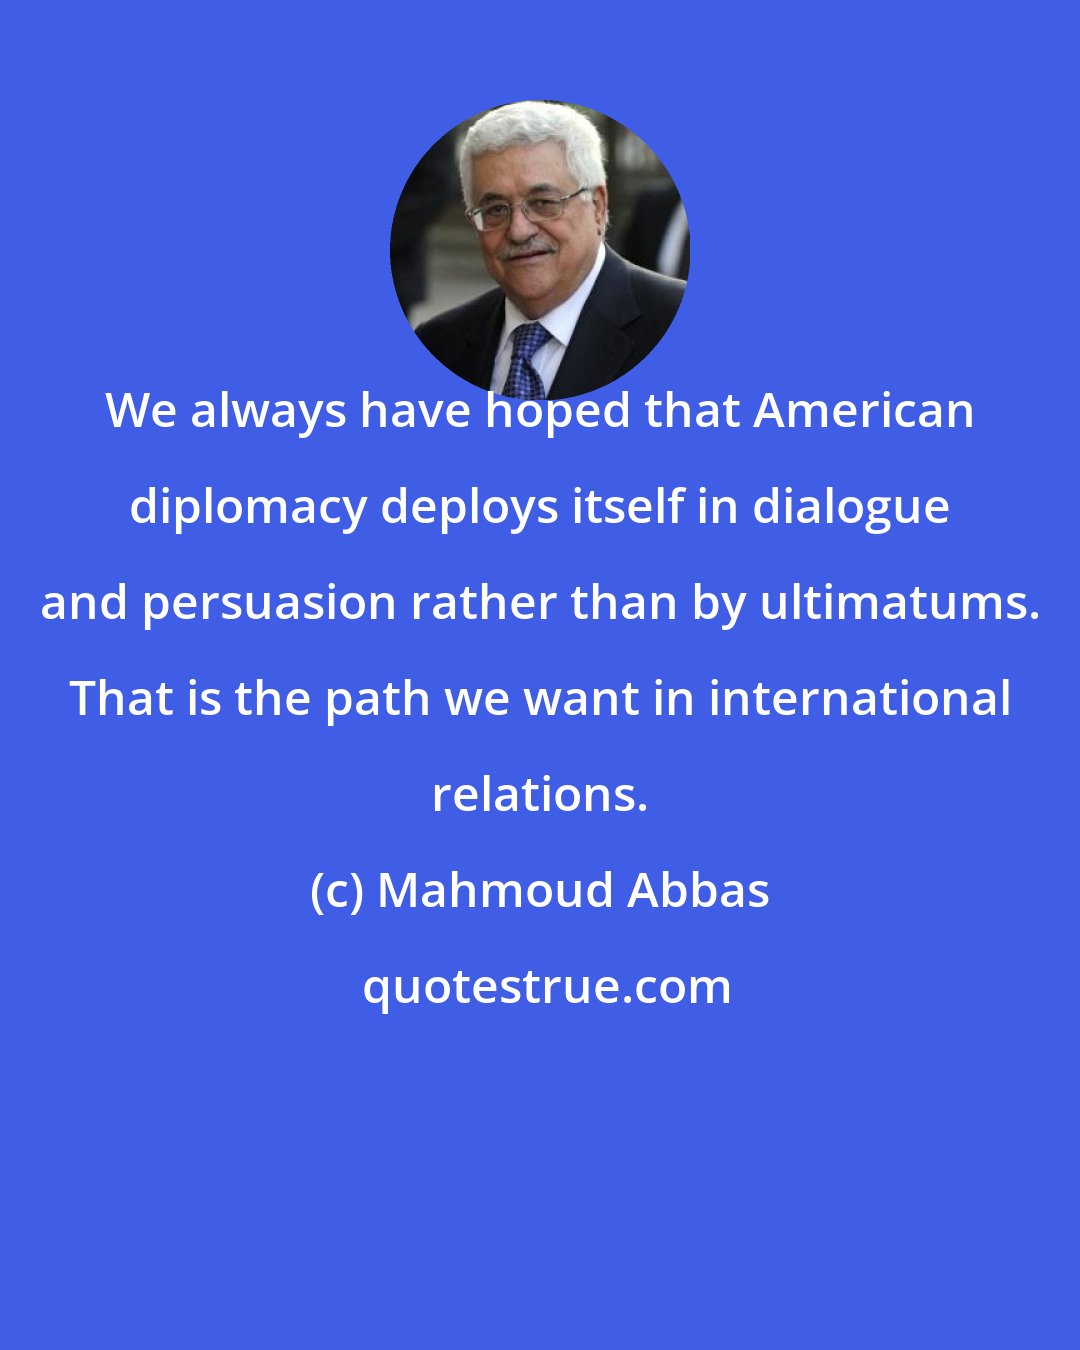 Mahmoud Abbas: We always have hoped that American diplomacy deploys itself in dialogue and persuasion rather than by ultimatums. That is the path we want in international relations.